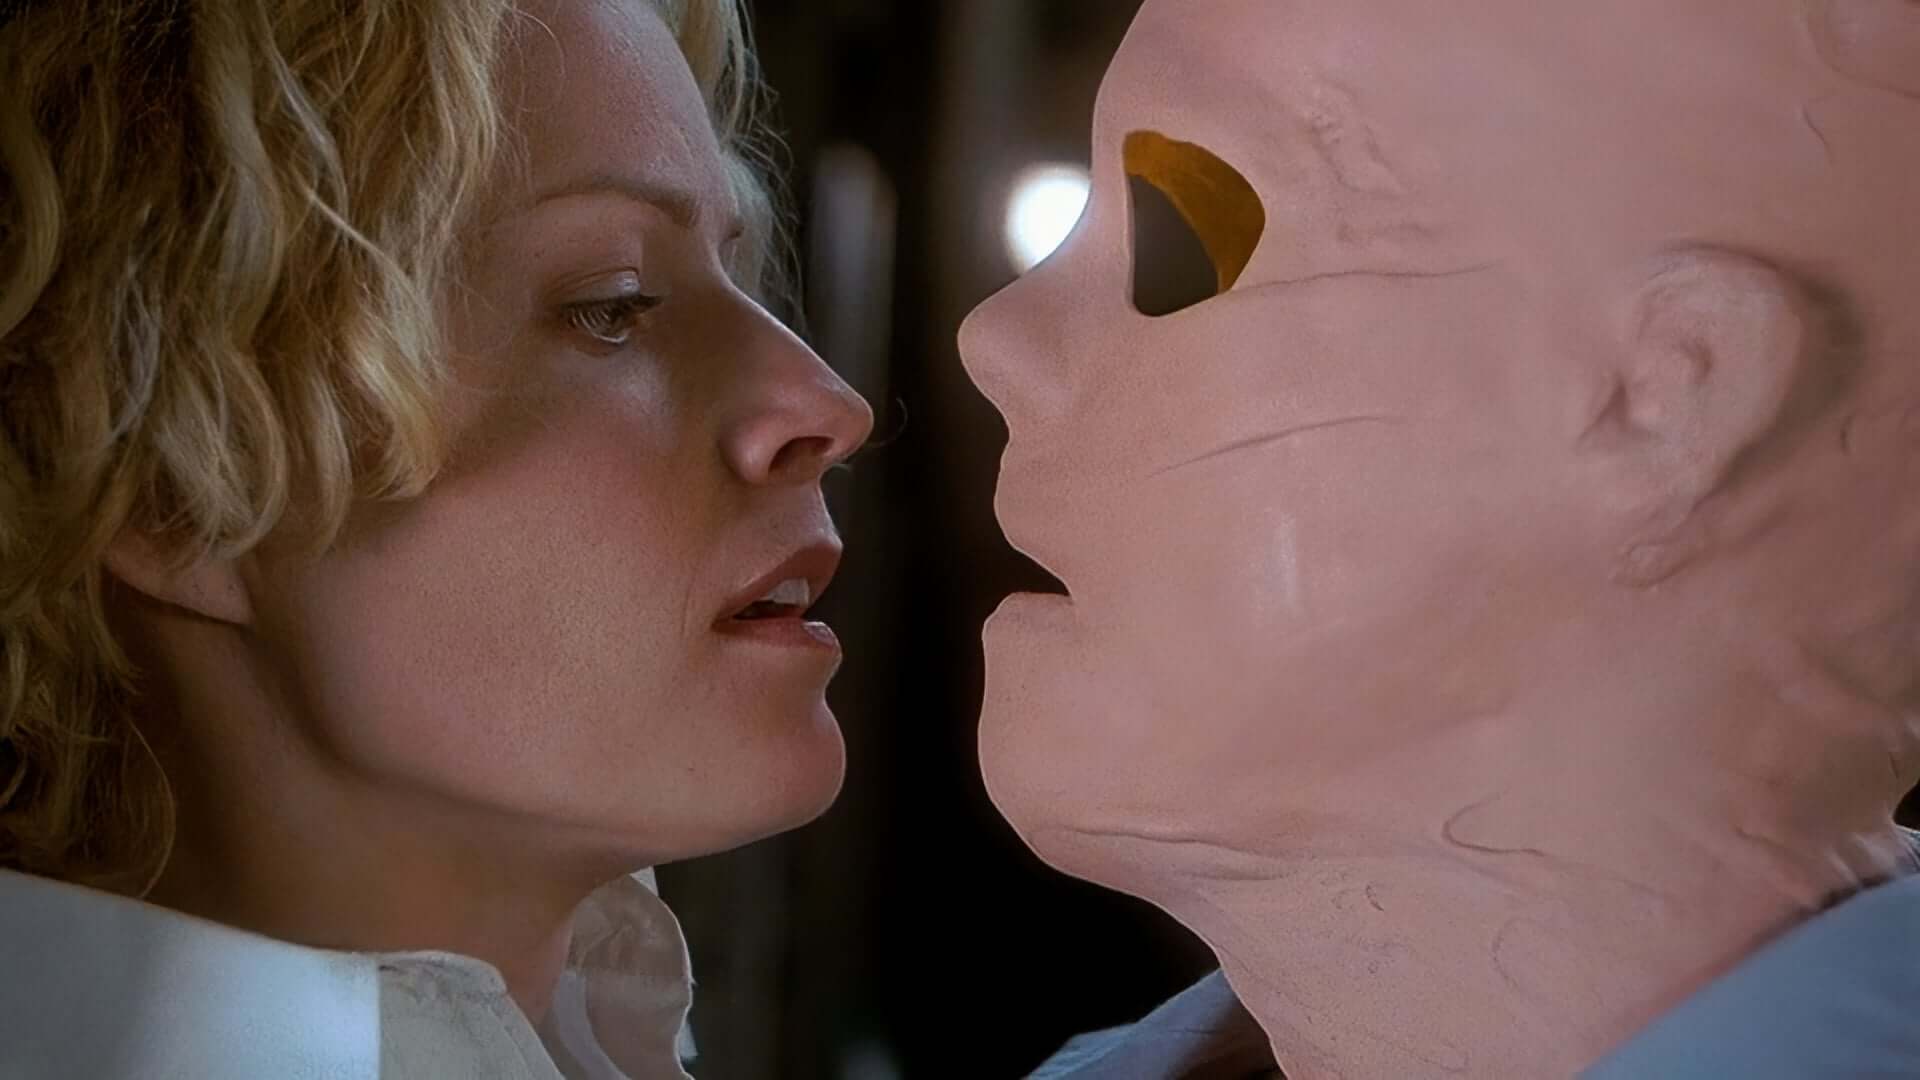 Hollow Man (2000) An Invisible Kevin Bacon, wearing a crudely made latex mask with no visible eyes stares threateningly at scared but calm Elisabeth Shue